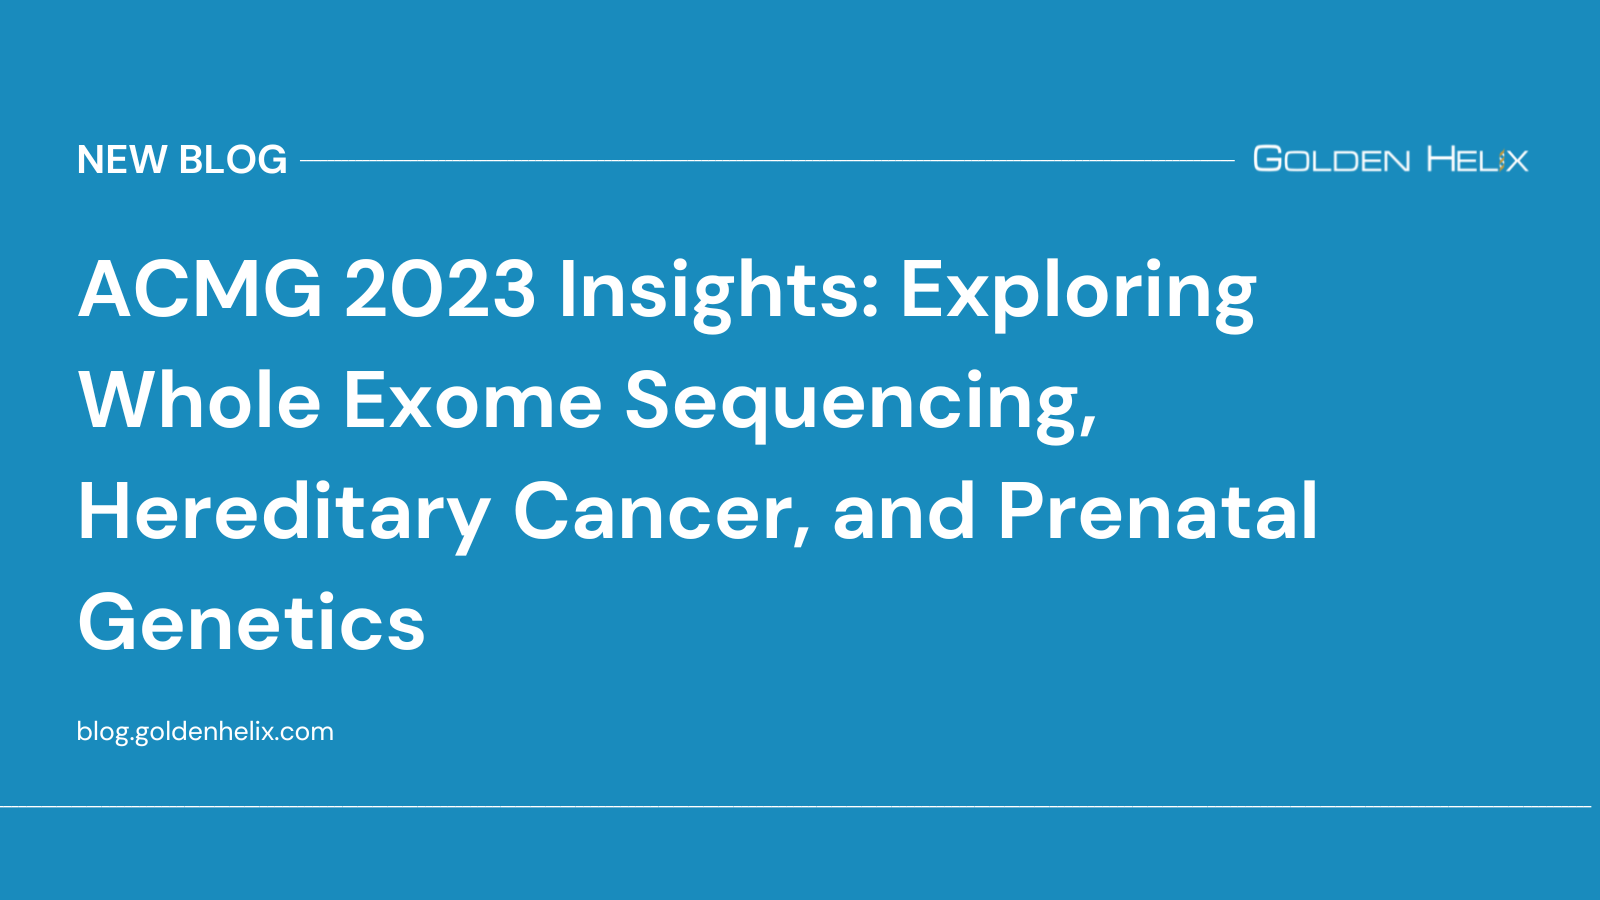 ACMG 2023 Insights Exploring Whole Exome Sequencing, Hereditary Cancer, and Prenatal Genetics 